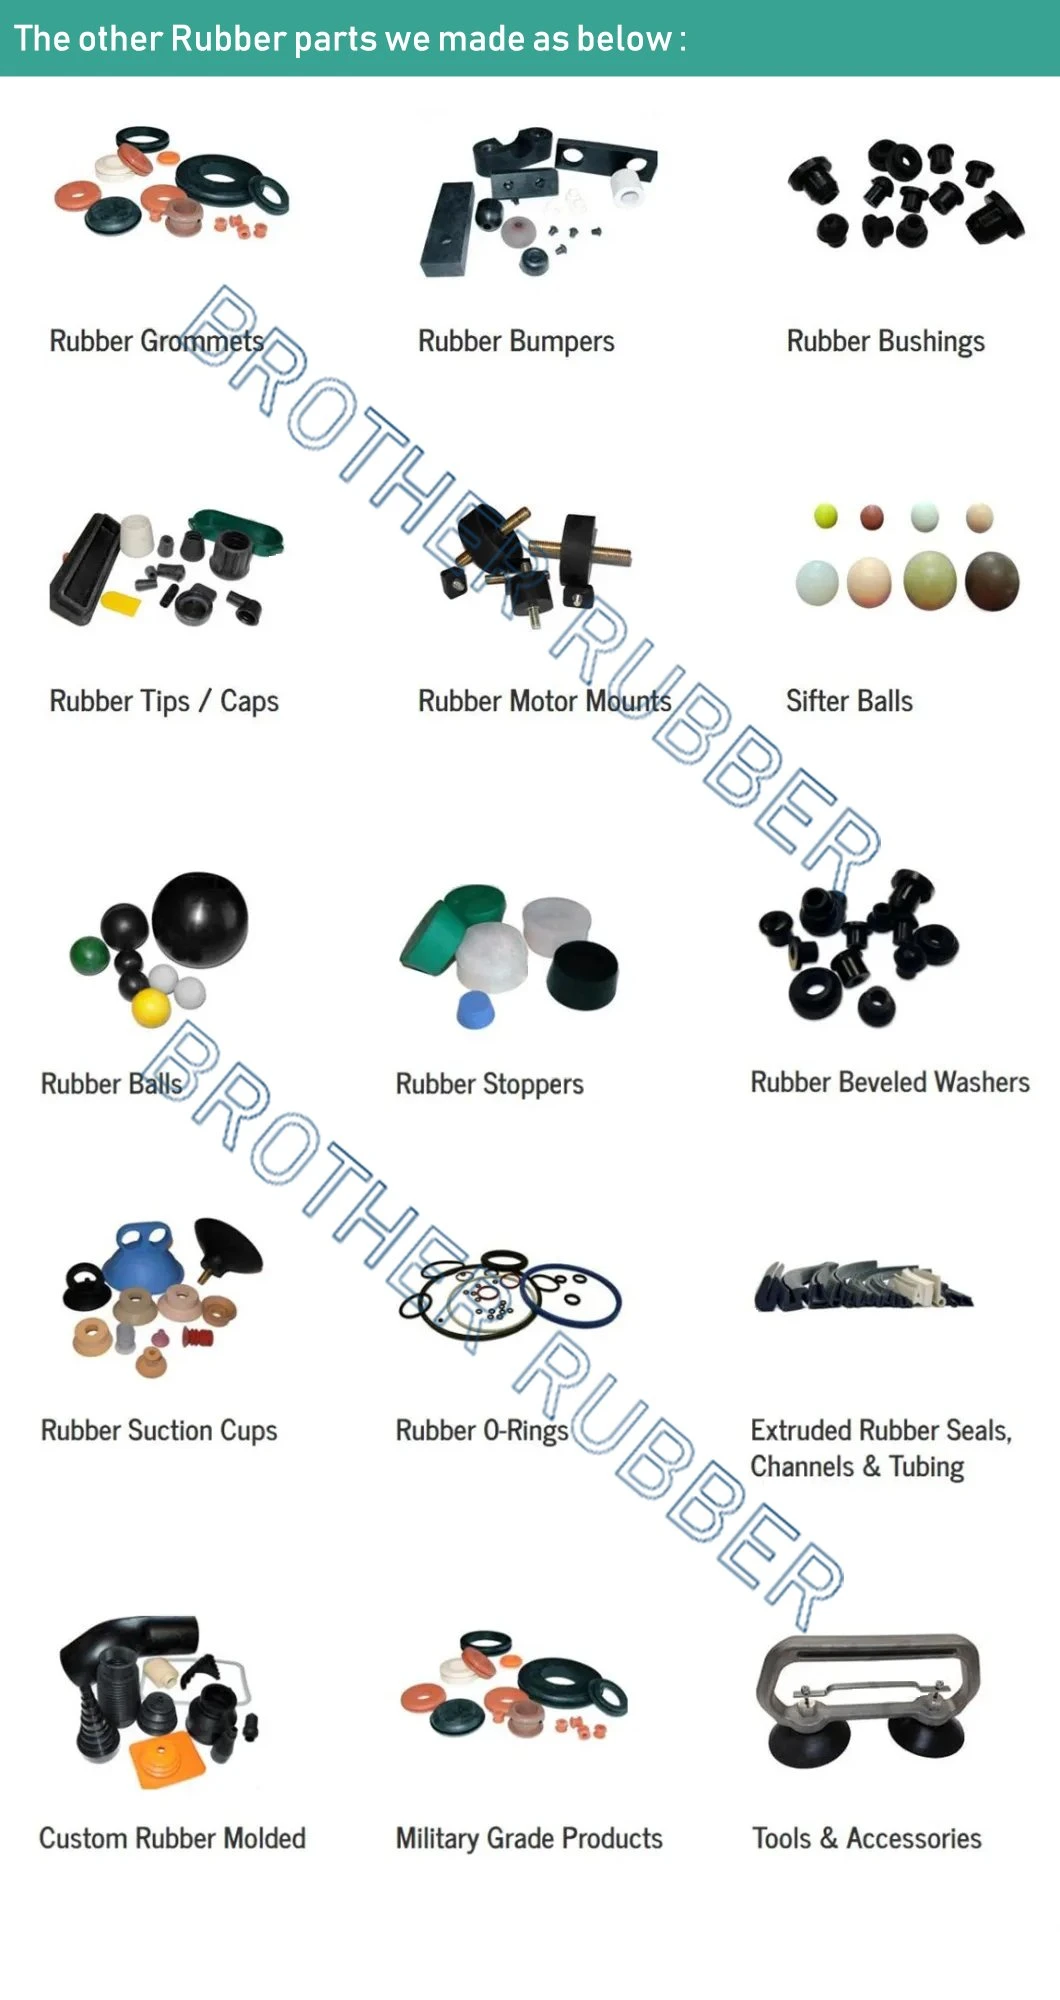 Factory Customized Silicone Keypads Buttons Conductive Electronic Button Rubber Silicone Phone Button and Key Keypads